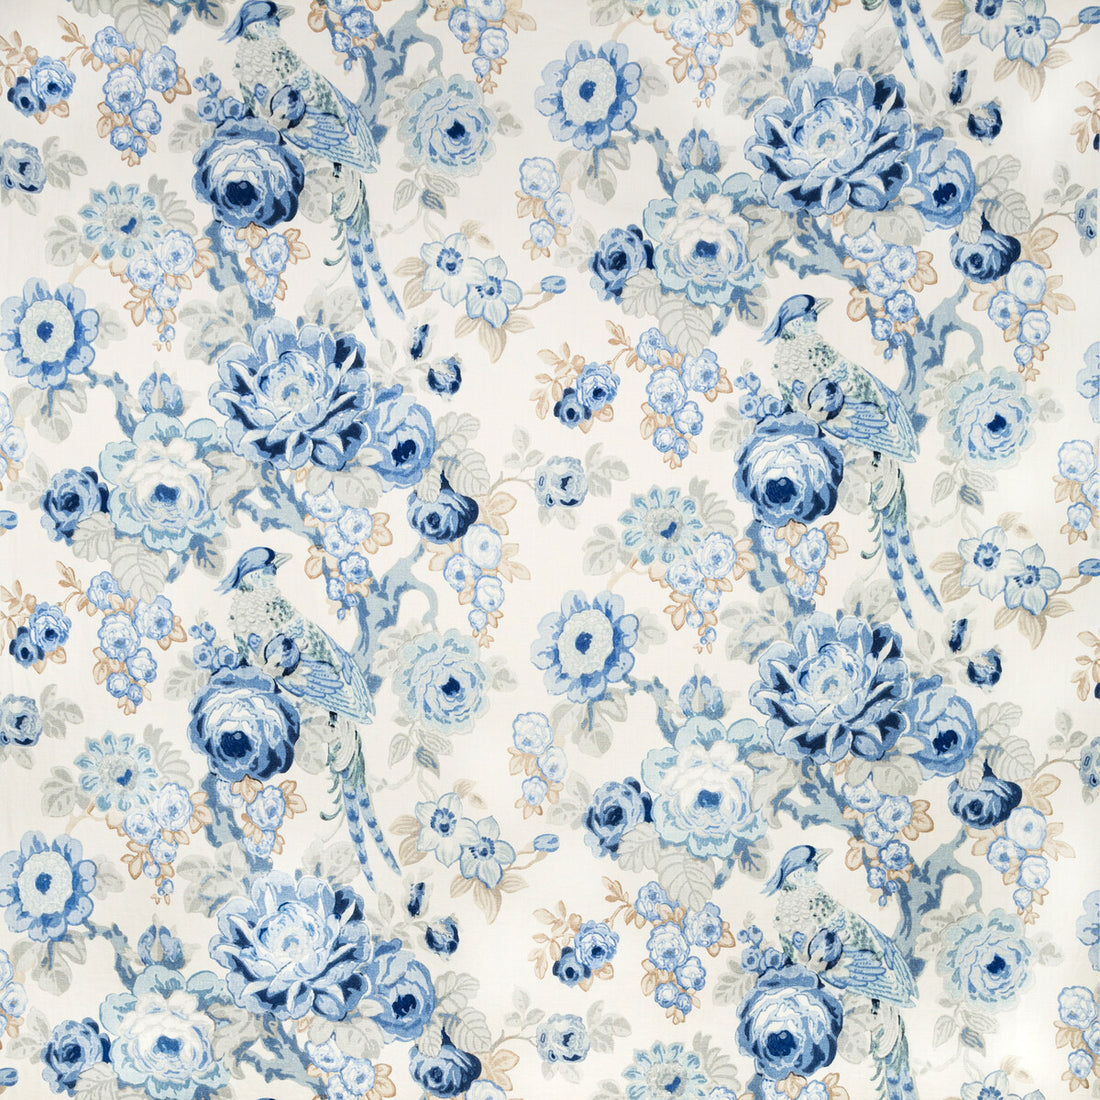 Avondale Print fabric in blue/slate color - pattern 2020181.515.0 - by Lee Jofa in the Avondale collection